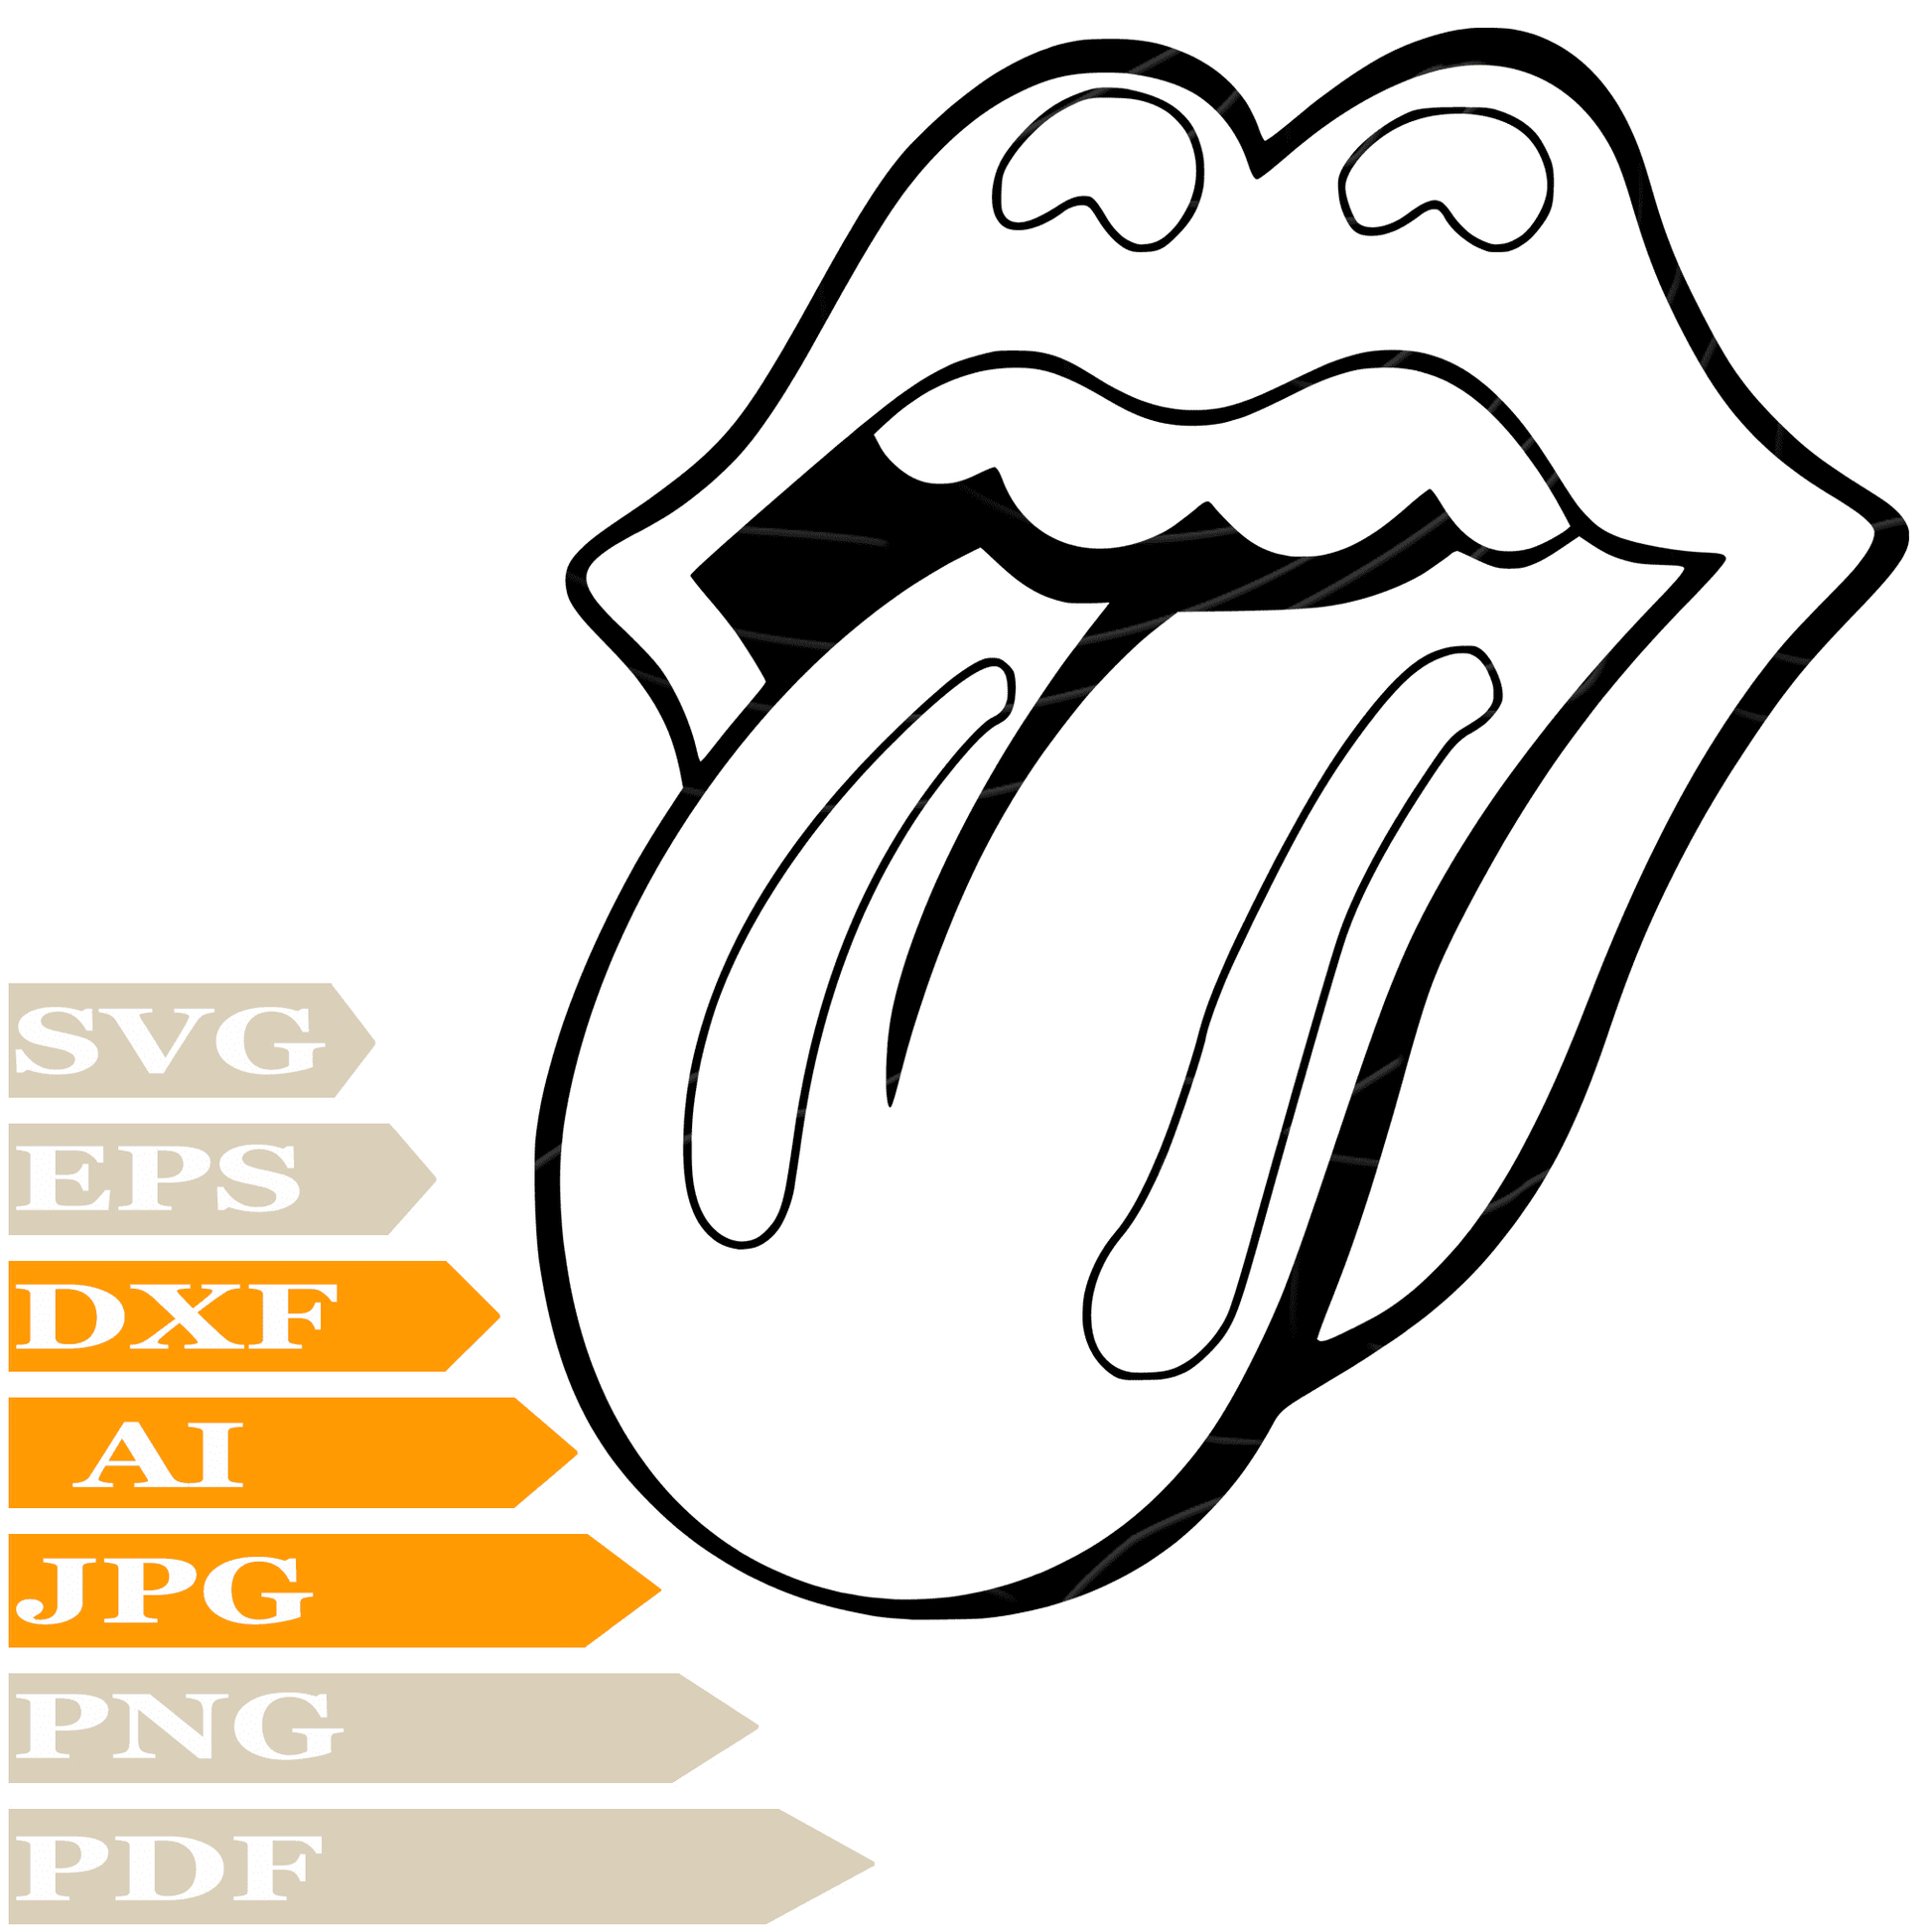 The Rolling Stones SVG-Rolling Stones Personalized SVG-The Rolling Stones Logo Drawing SVG-Music Band The Rolling Stones Logo Vector Illustration-PNG-Decal-Cricut-Digital Files-Clip Art-Cut File-For Shirts-Silhouette